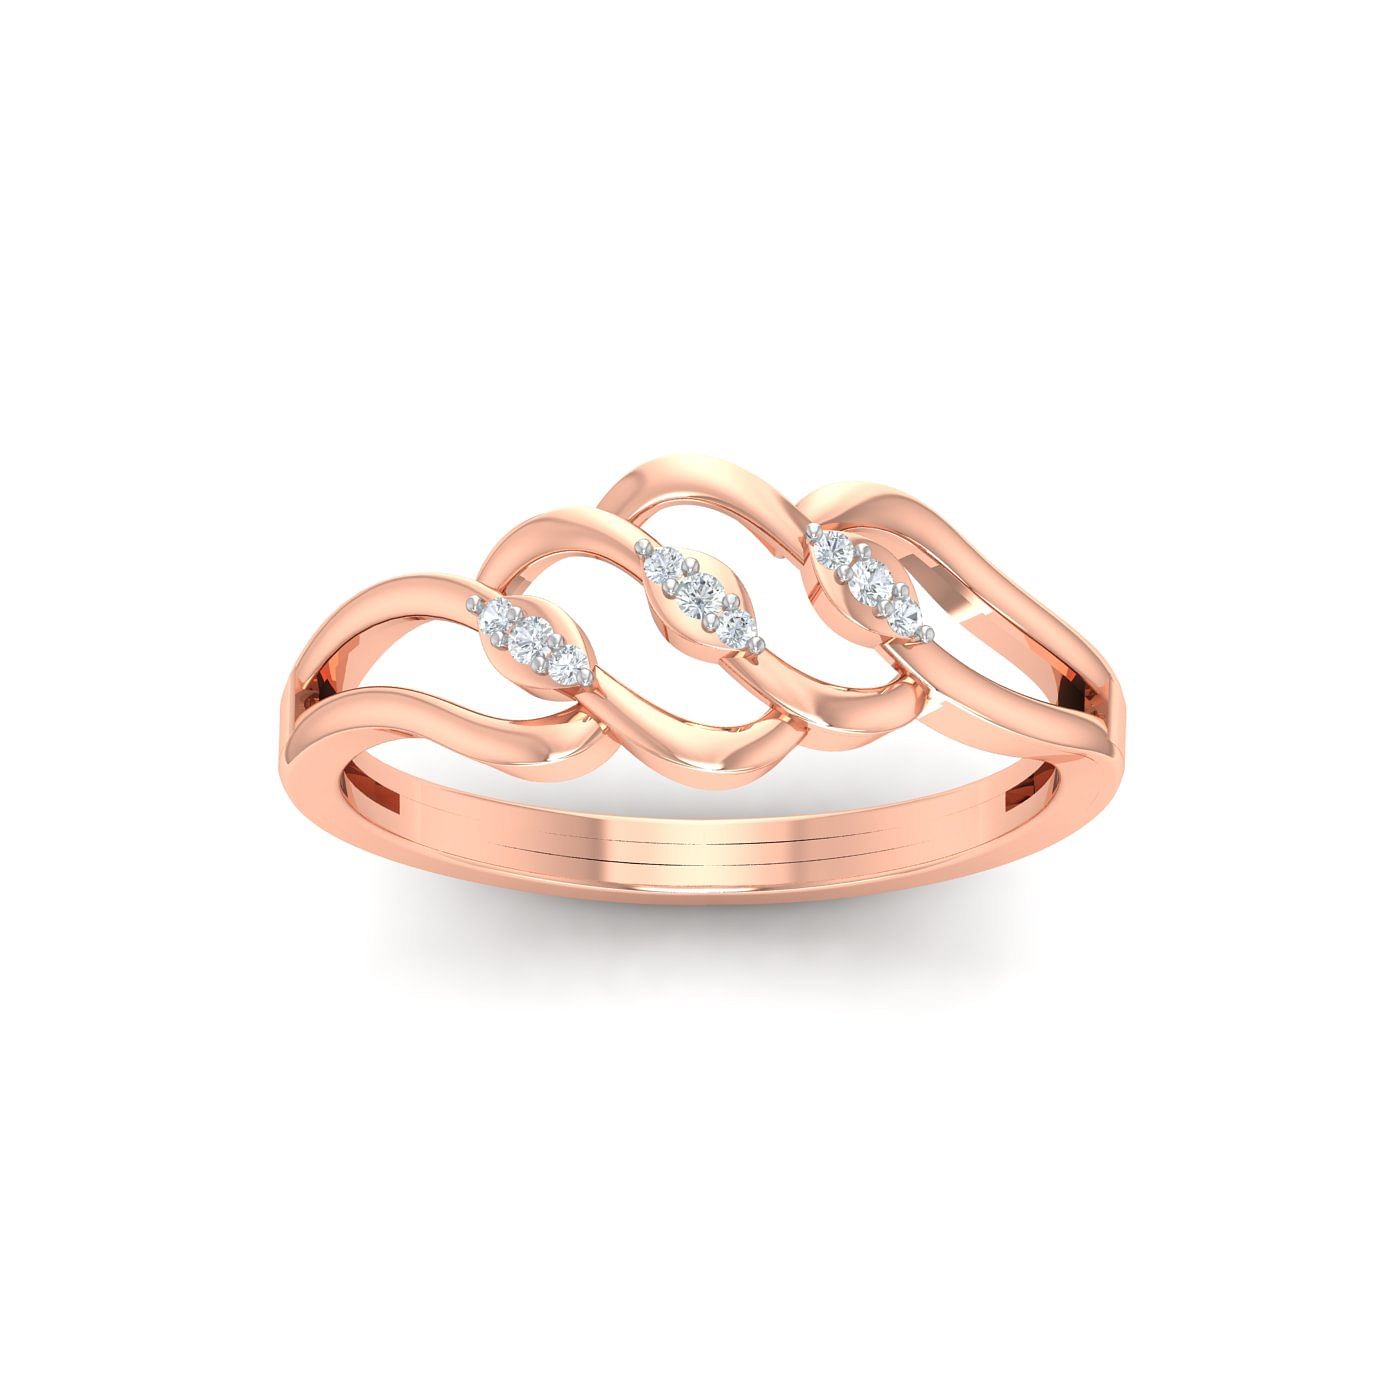 rose gold ring designs latest